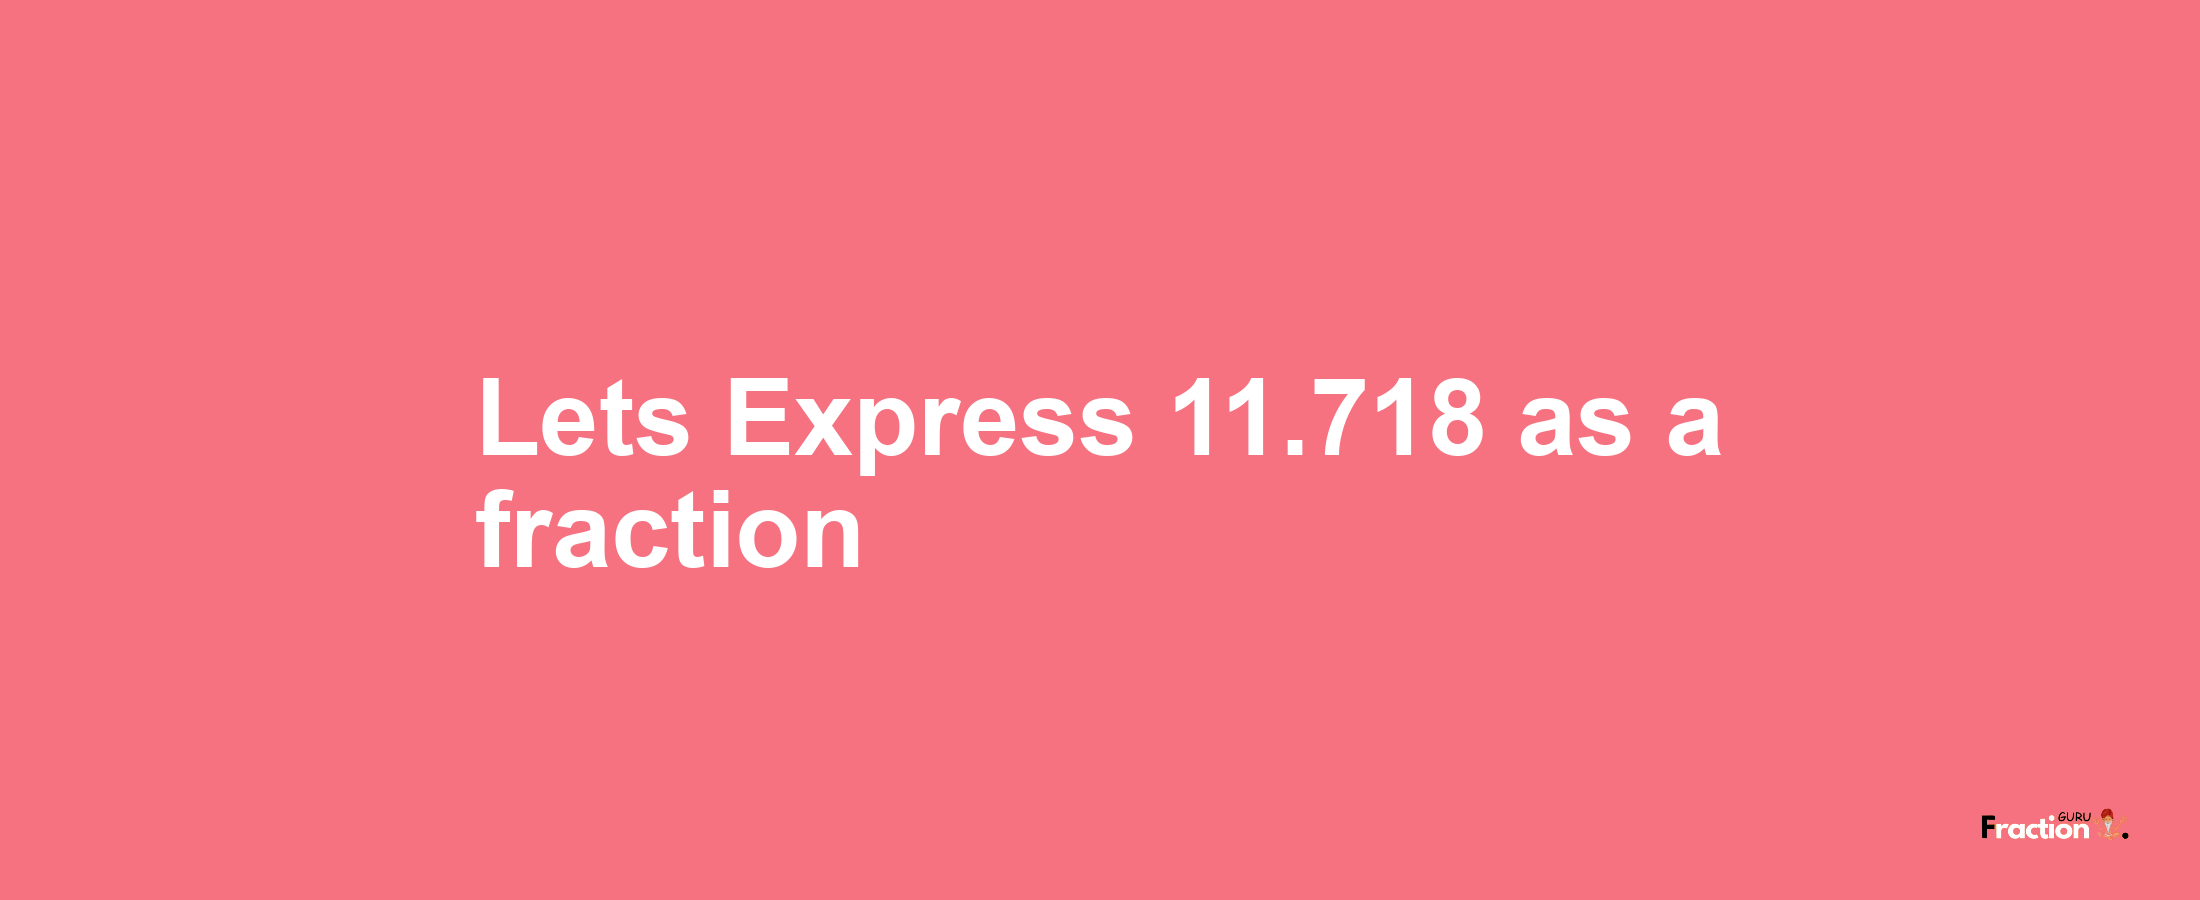 Lets Express 11.718 as afraction